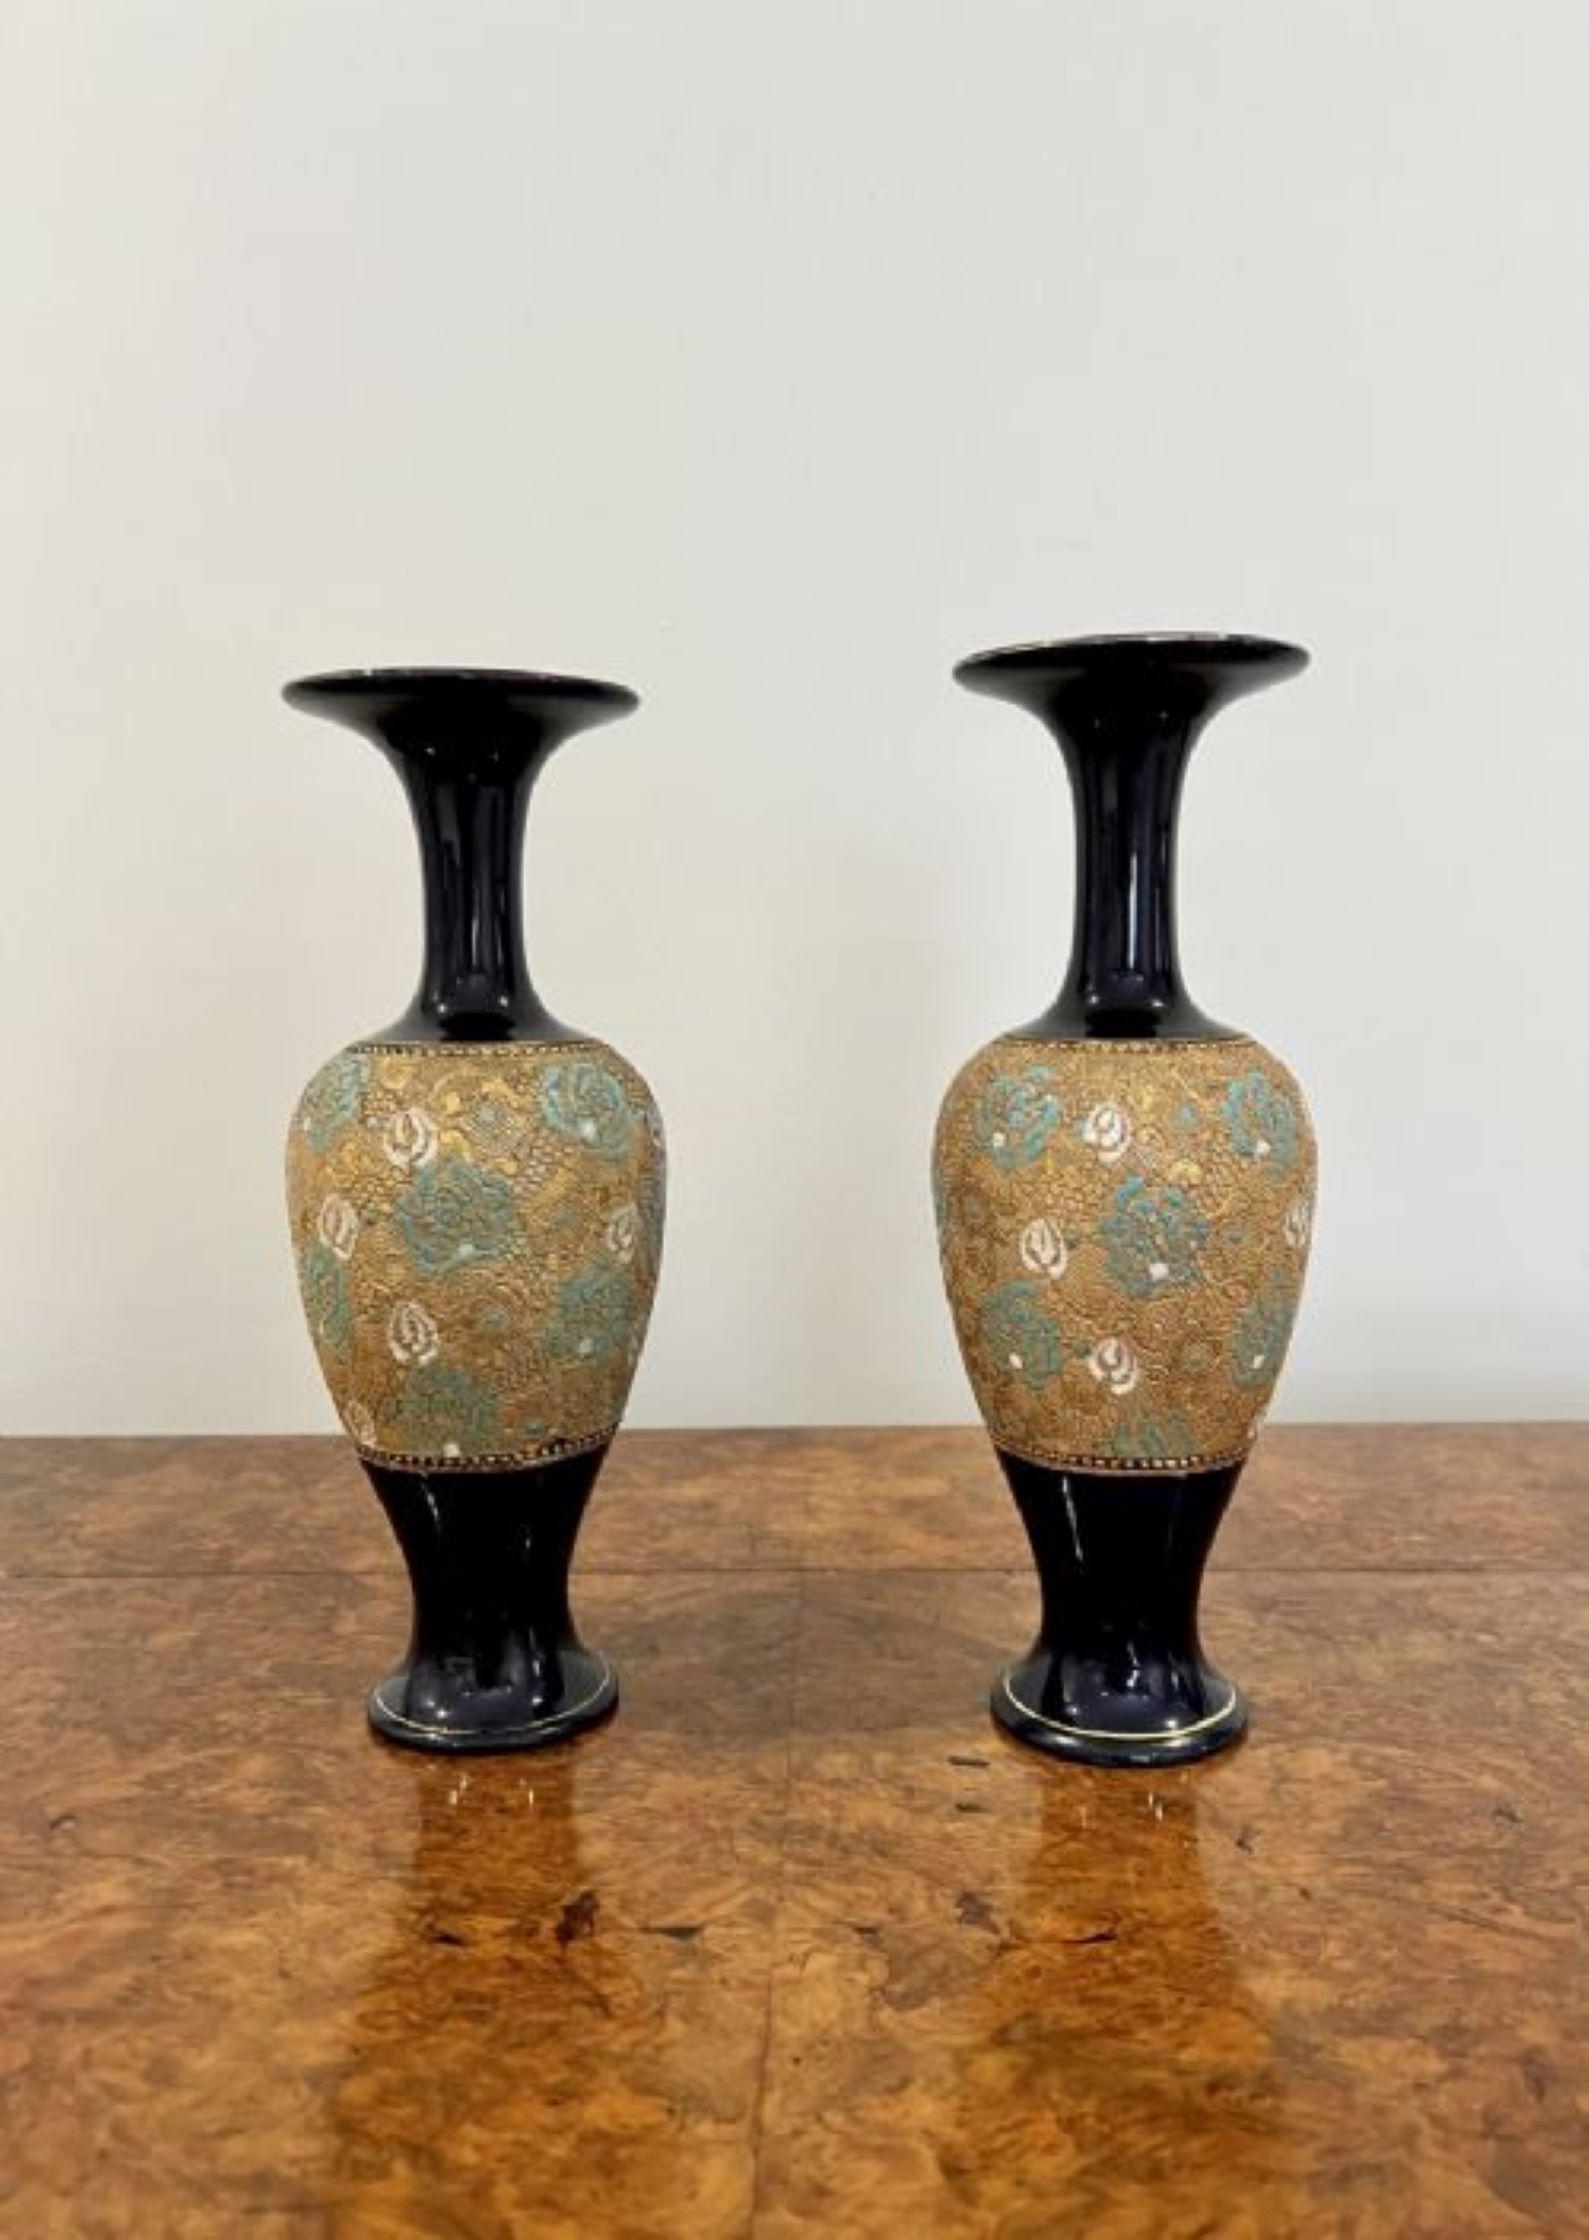 Pair of quality antique Victorian Doulton vases having a quality pair of Doulton shaped vases with wonderful blue and gold colours to the neck of the vases, fabulous embossed flowers to the center with hand painted detail in wonderful blue, white